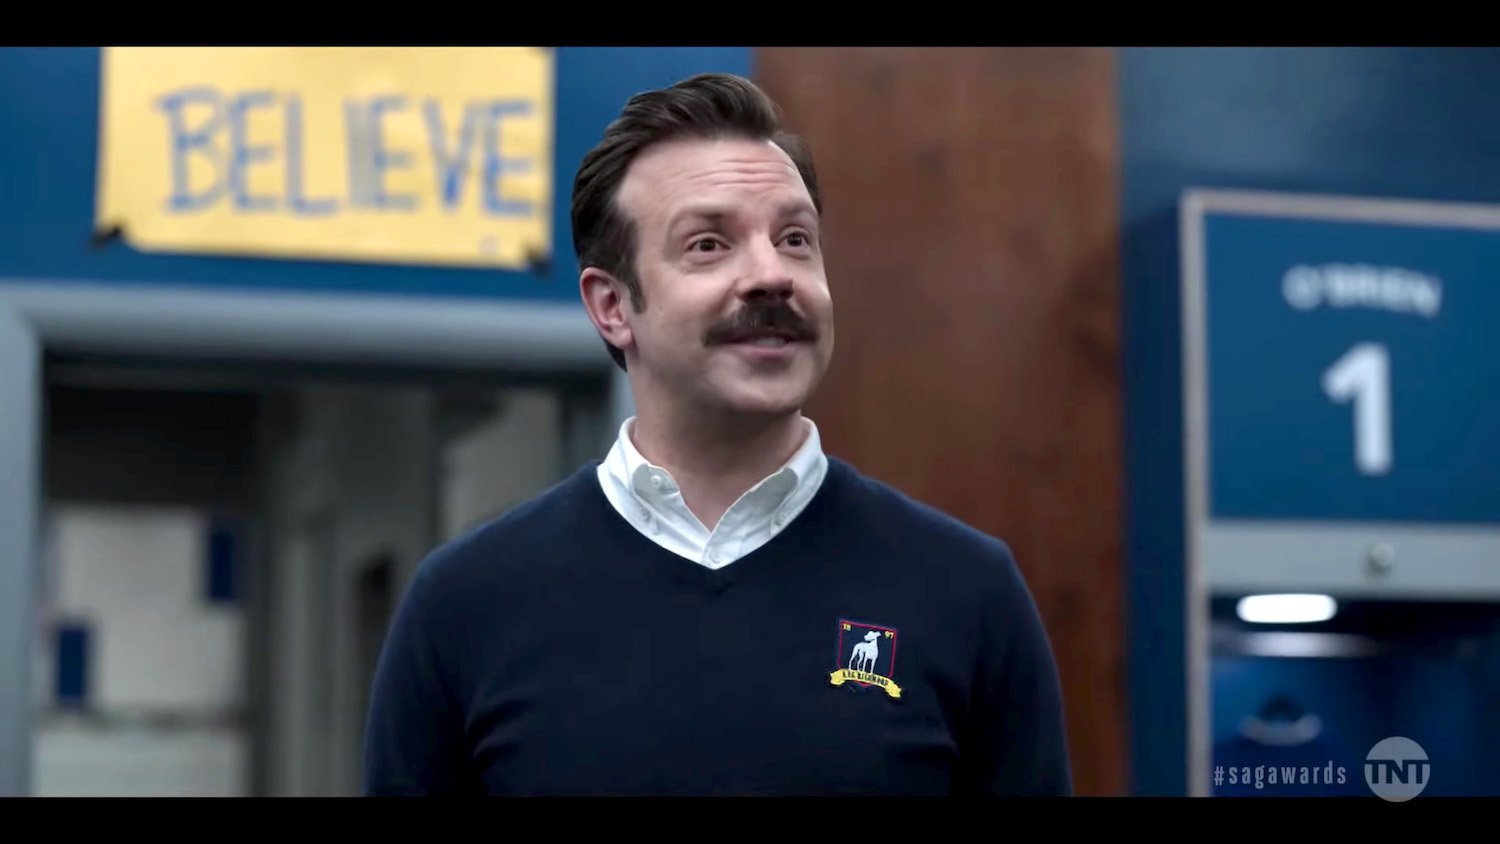 'Ted Lasso' star Jason Sudeikis in character